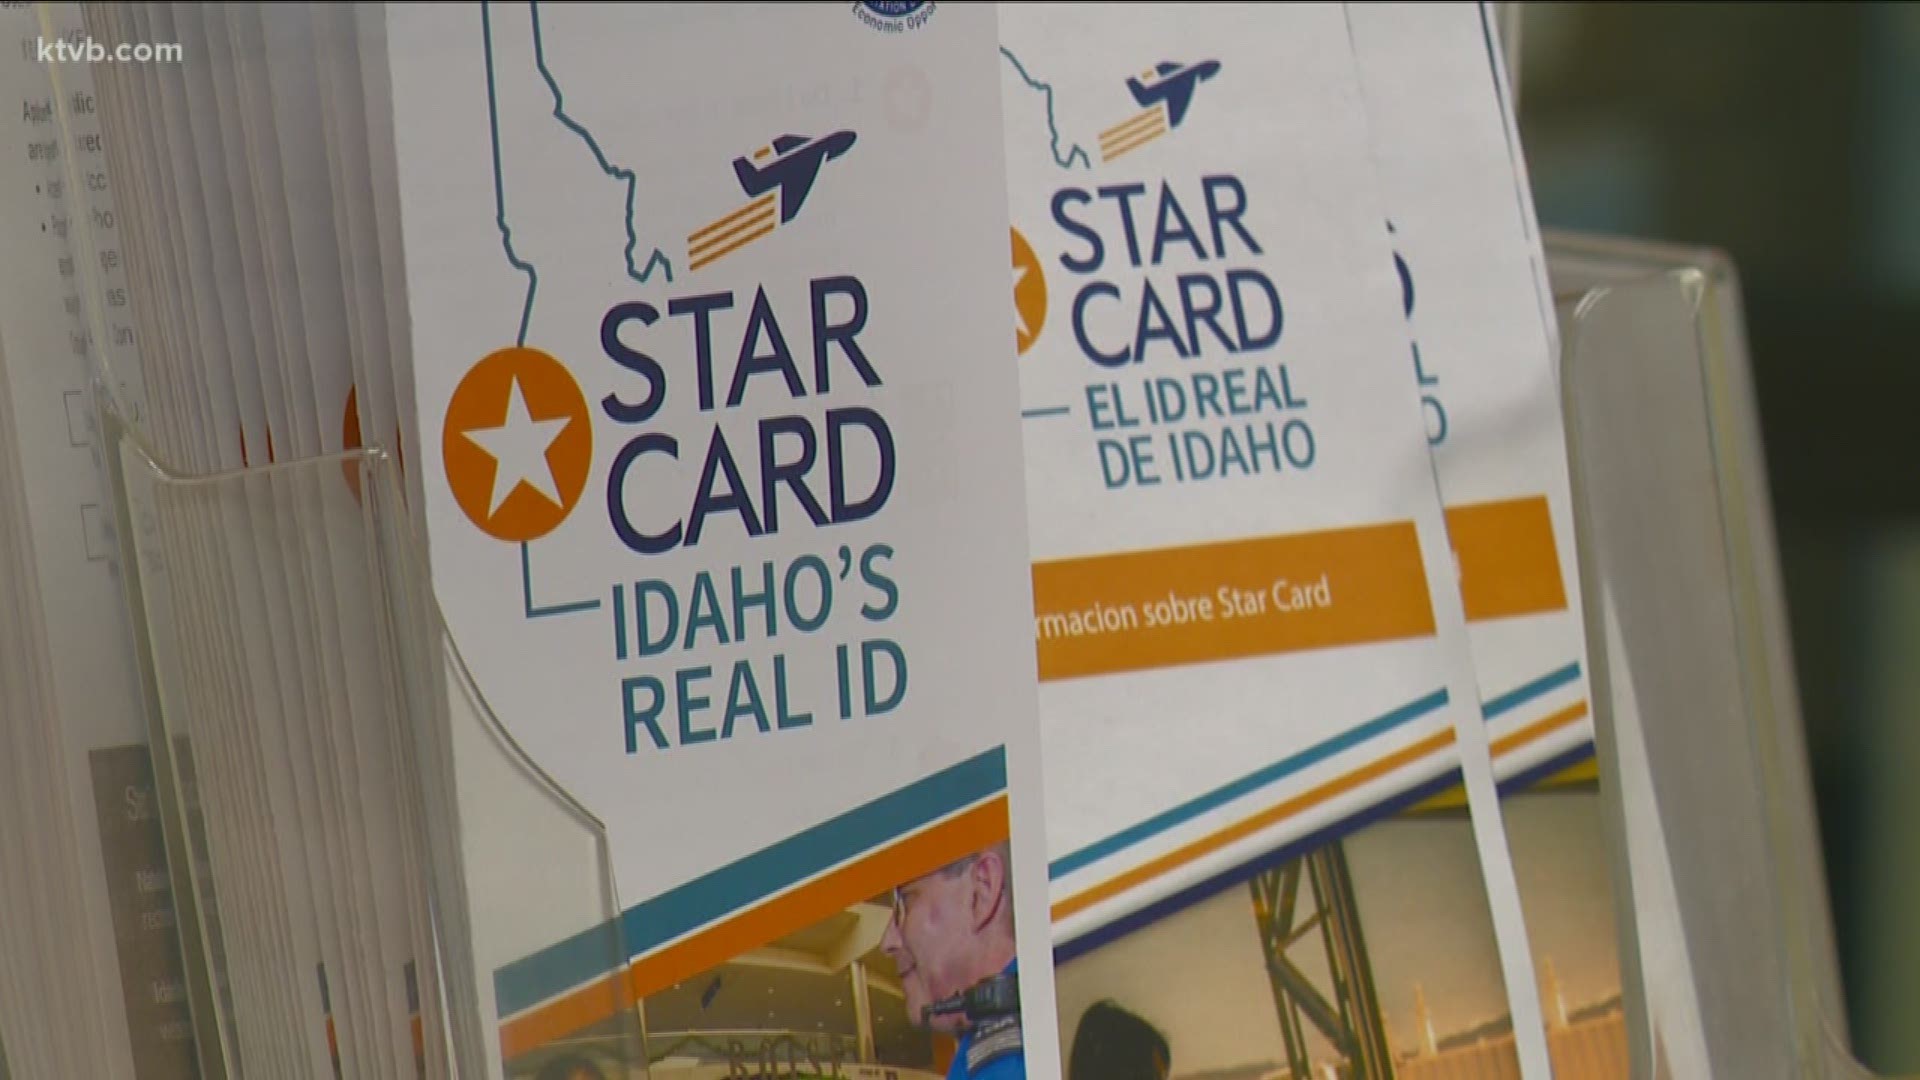 If you are planning on flying anywhere later this year you might want to get a Star Card now.